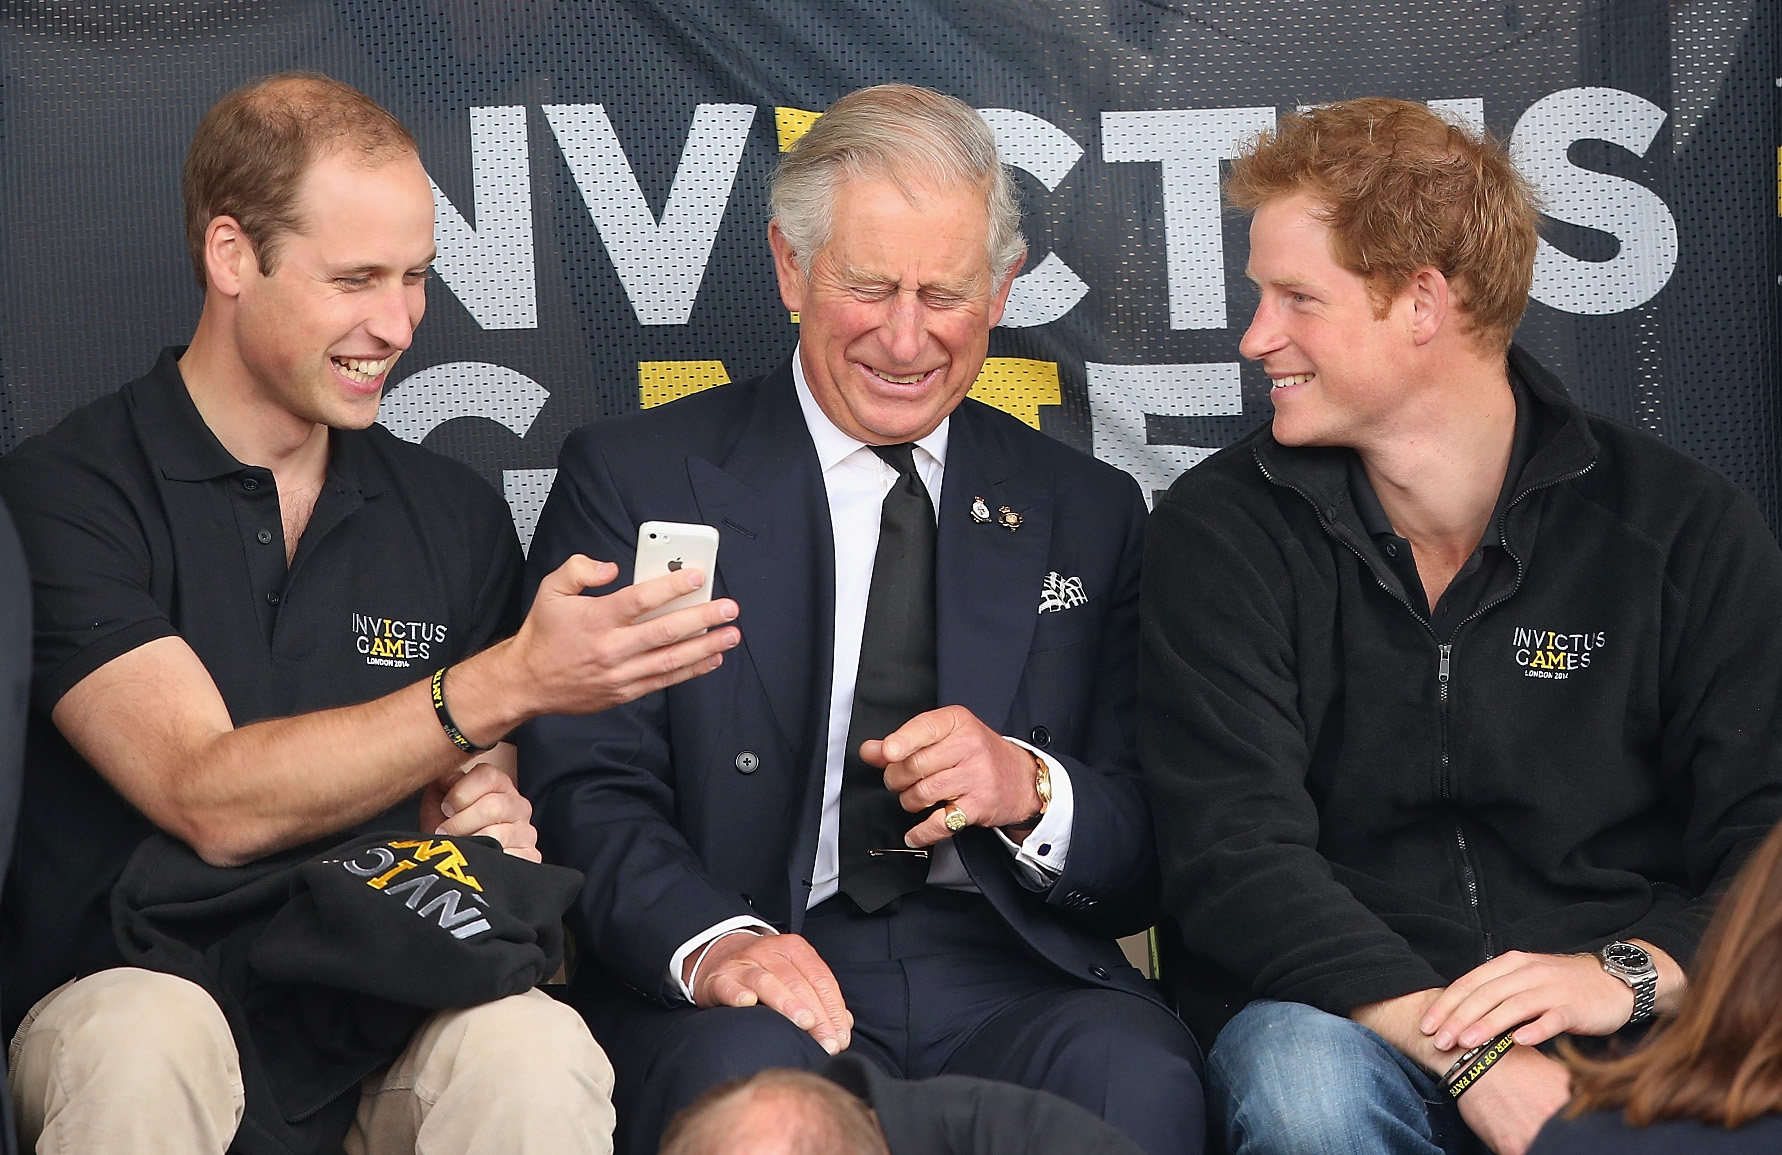 Prince Charles Prince William Prince Harry Getty Images